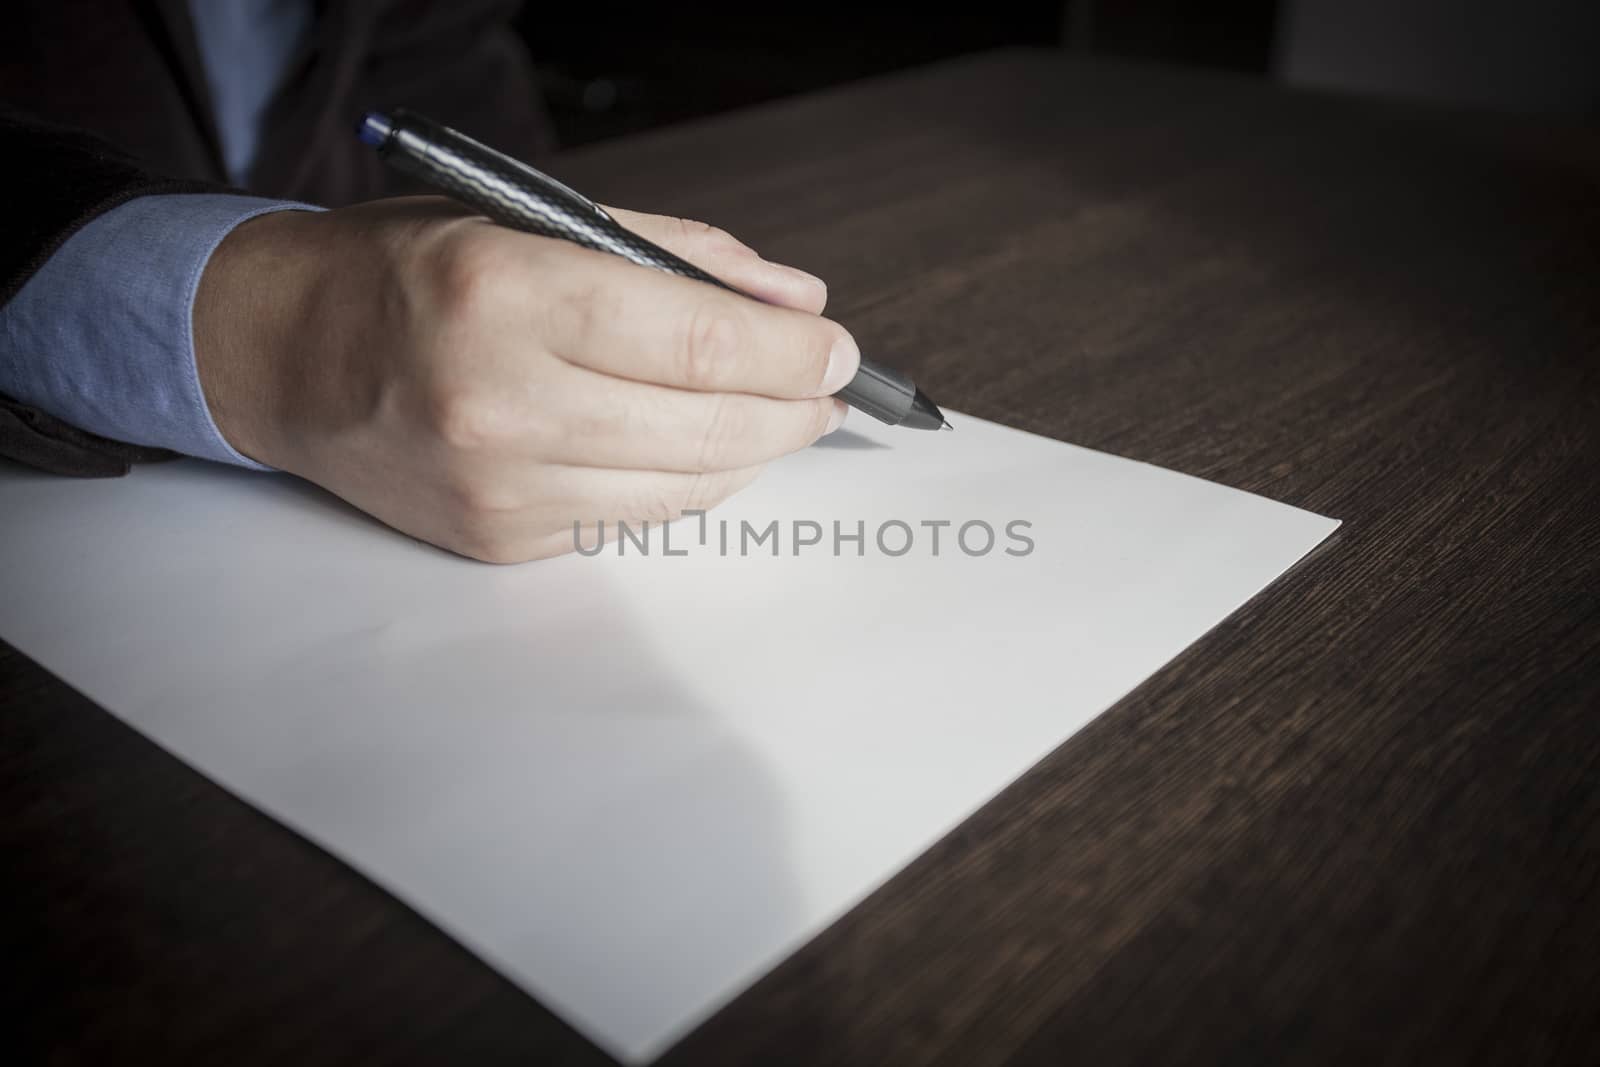 Signing of the contract by snep_photo